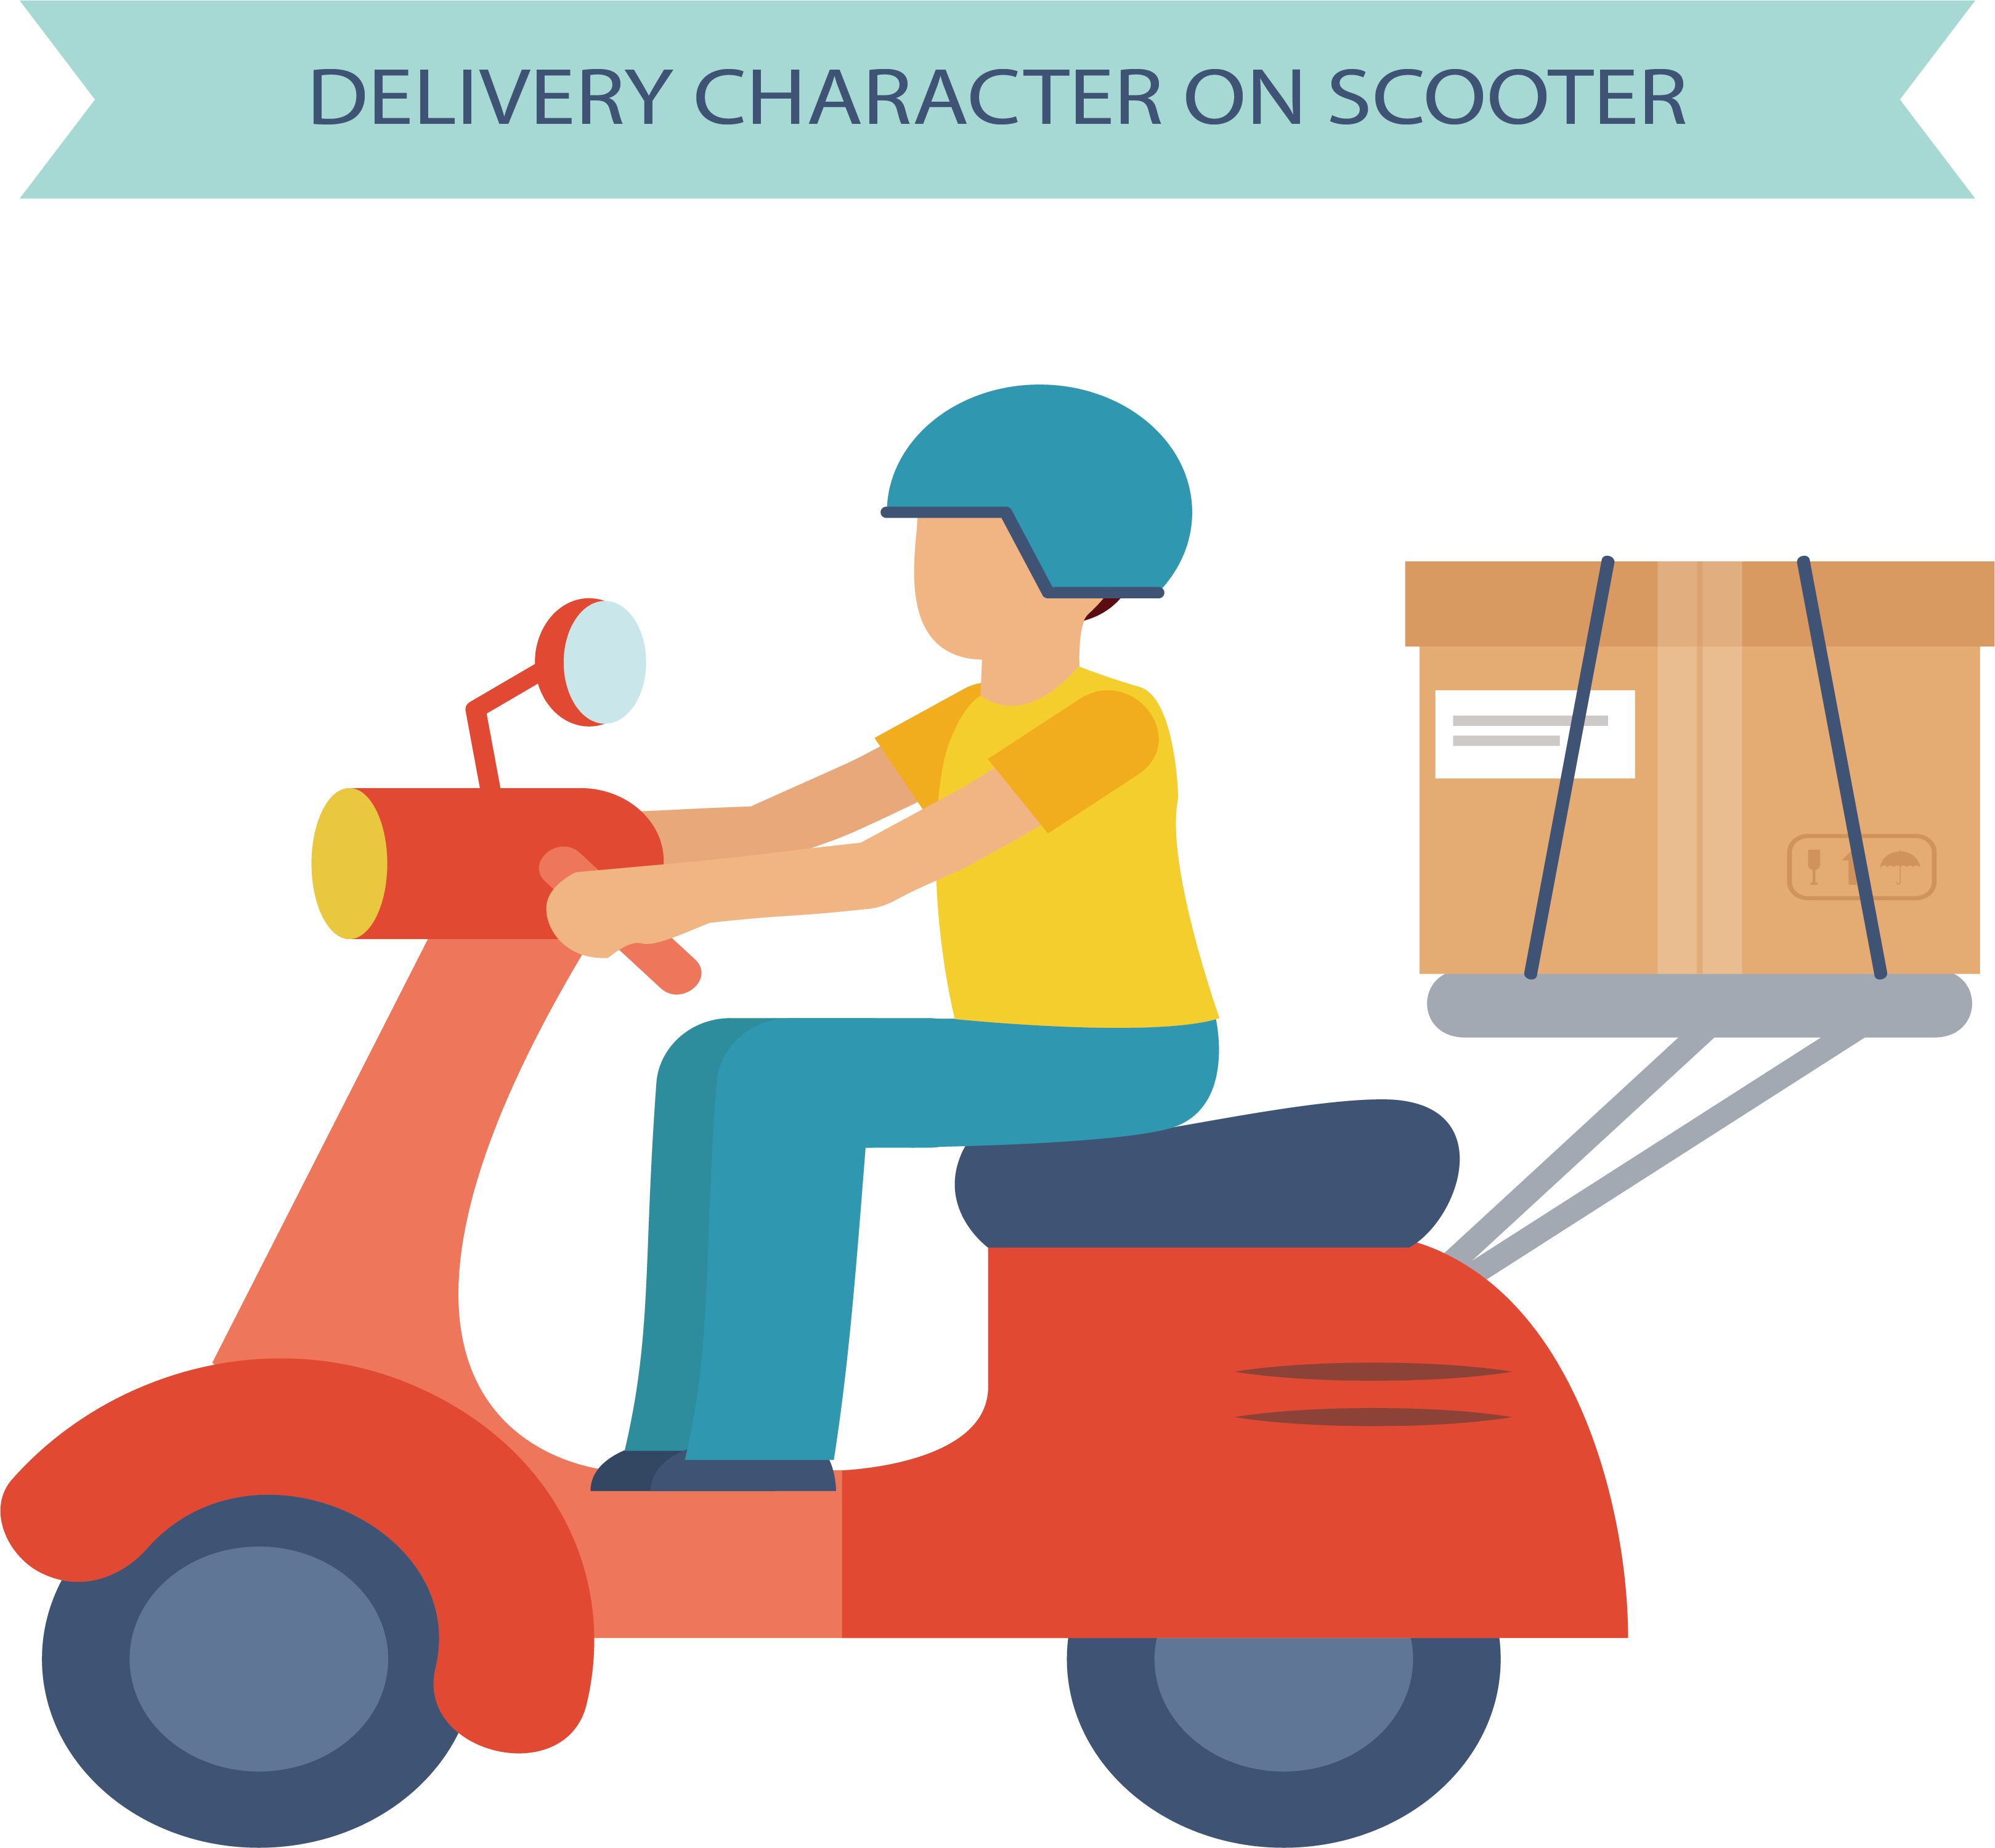 Scooter Motorcycle Courier - Scooter Motorcycle Courier (3238x2999)